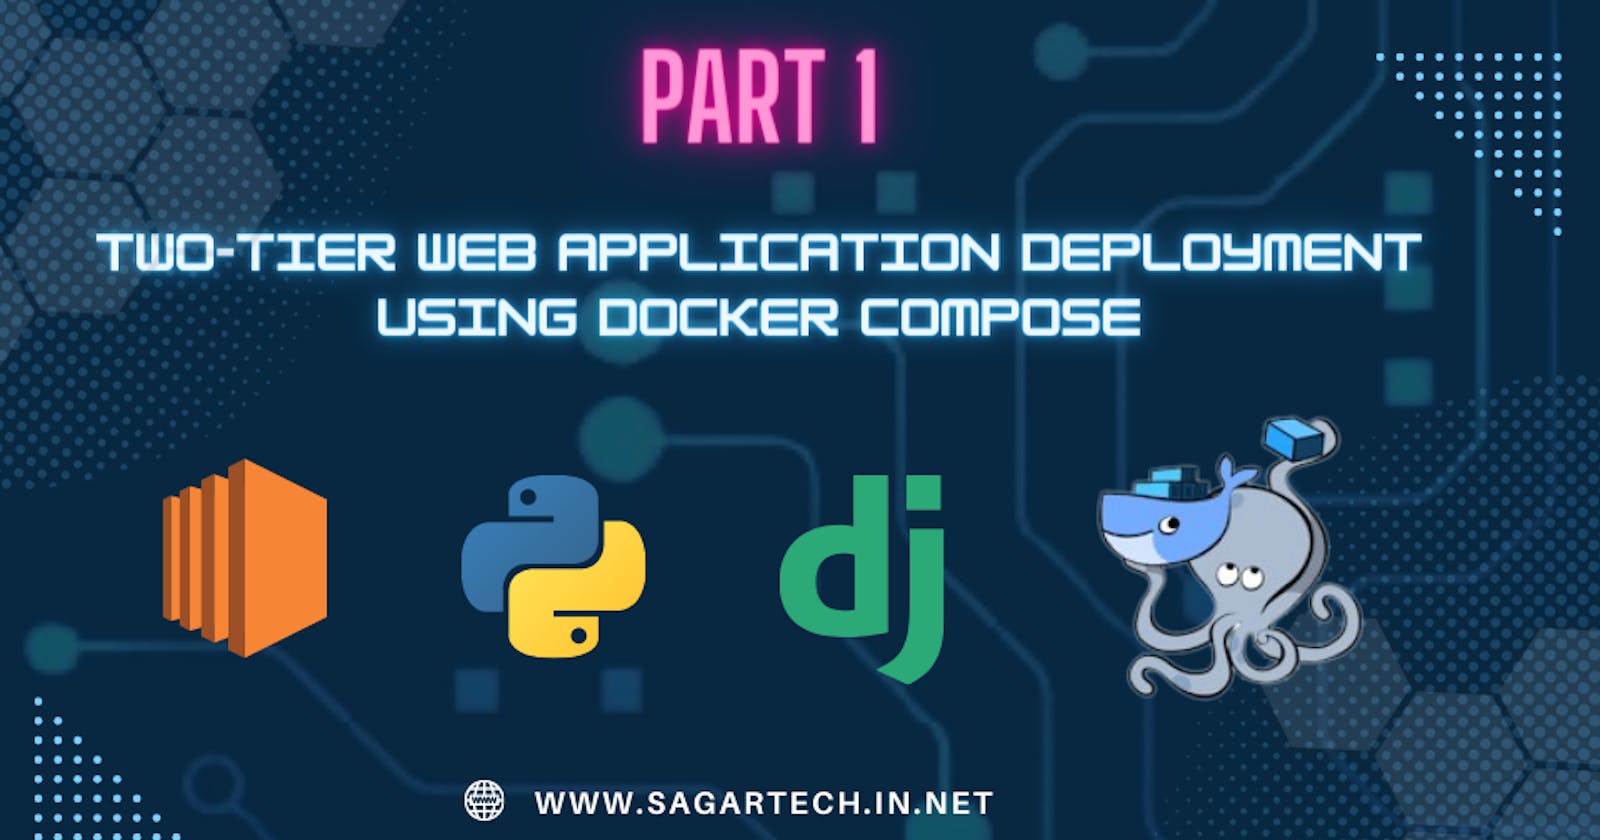 Two-Tier Web Application Deployment Using Docker Compose